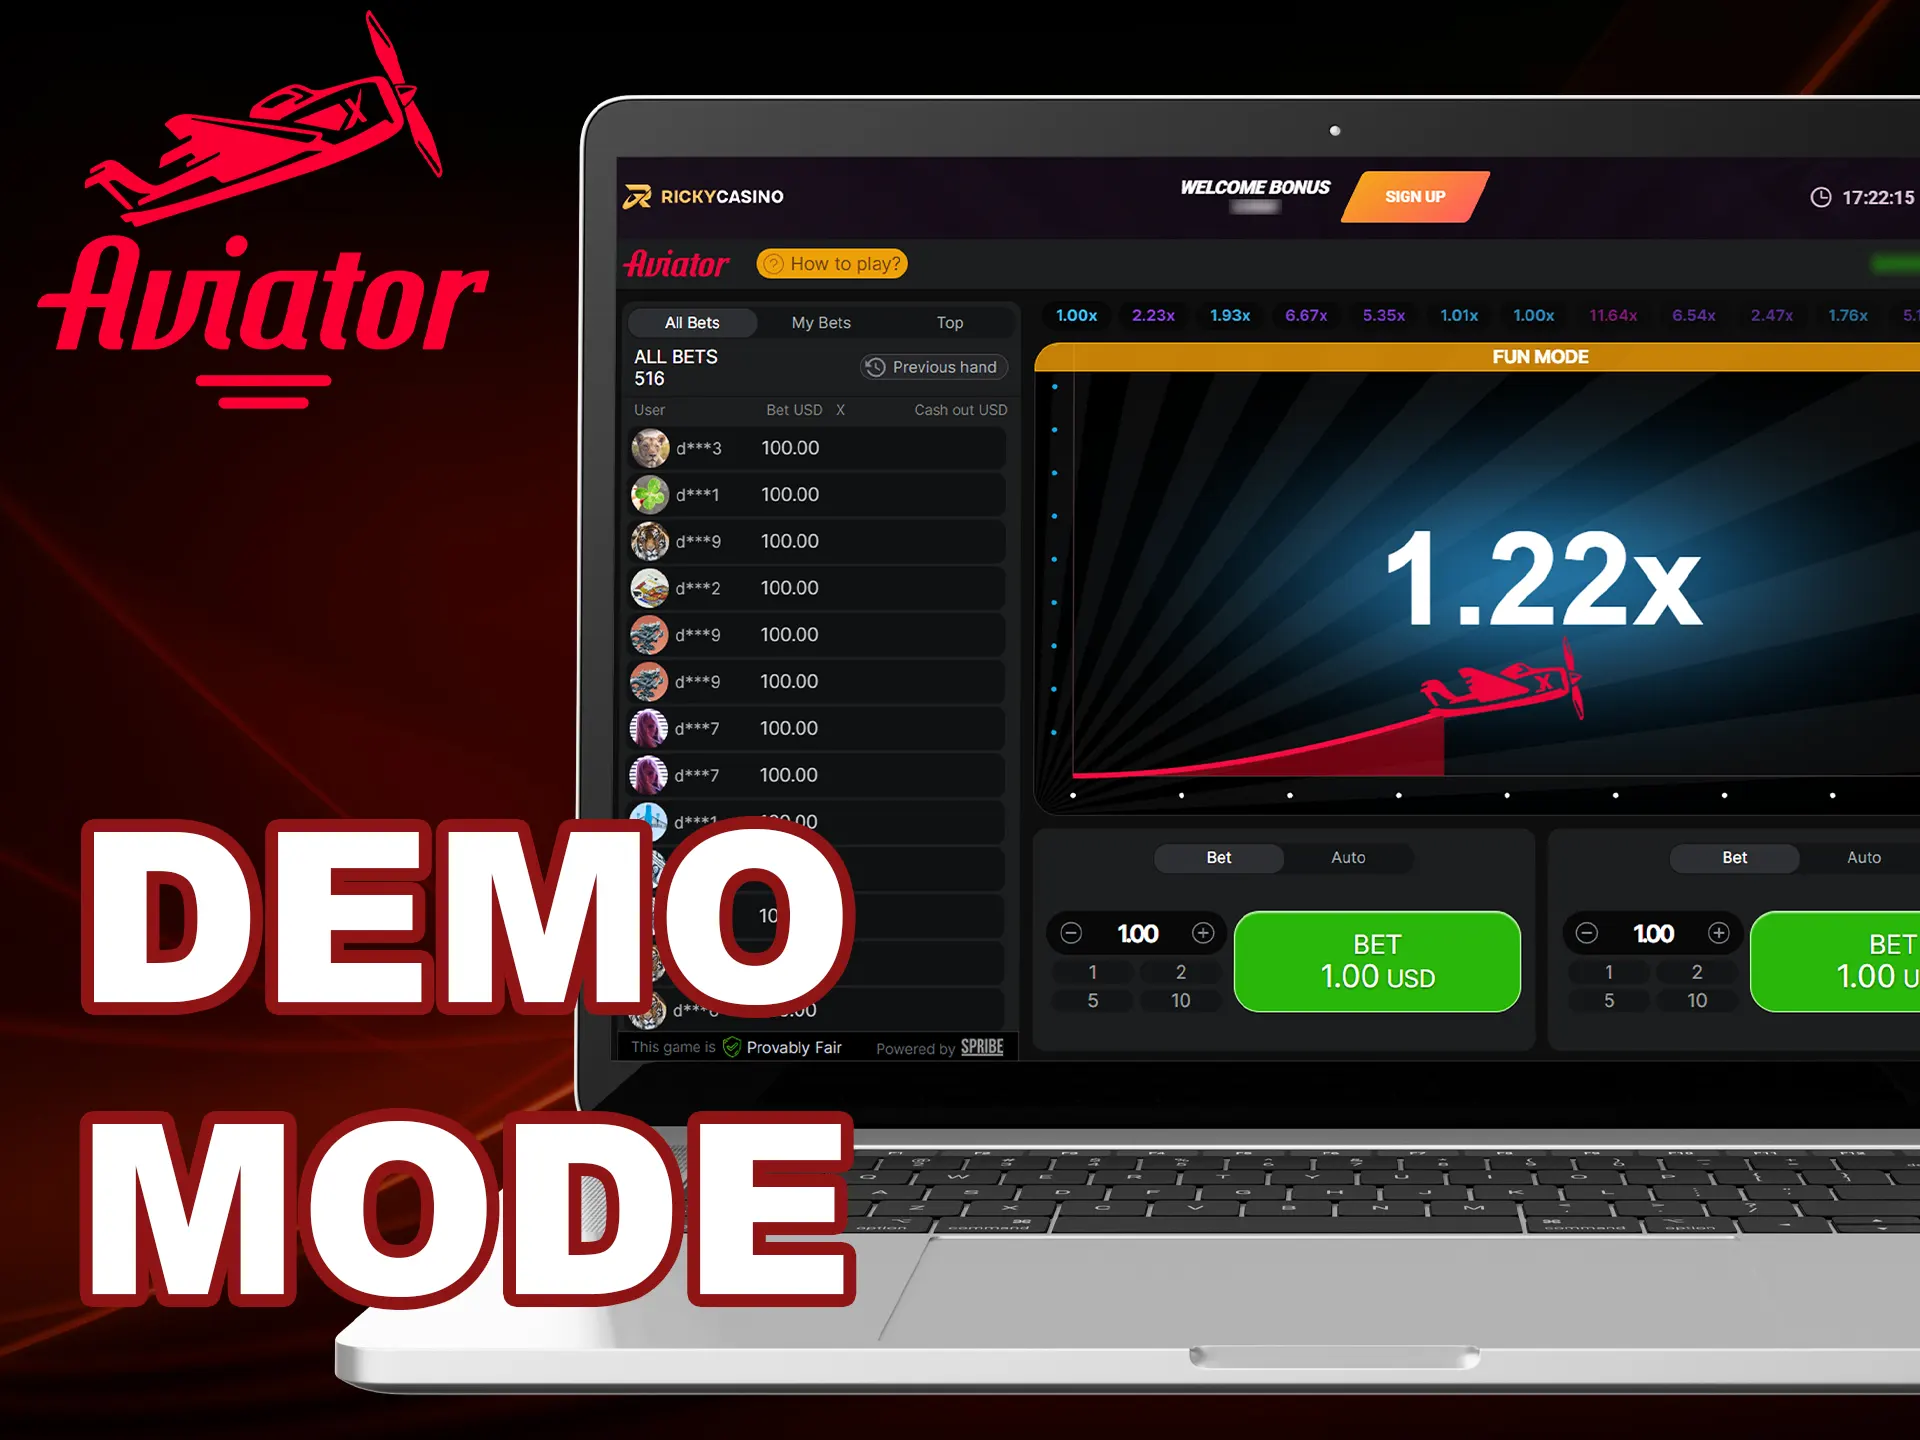 Take advantage of the Aviator demo mode without risk.